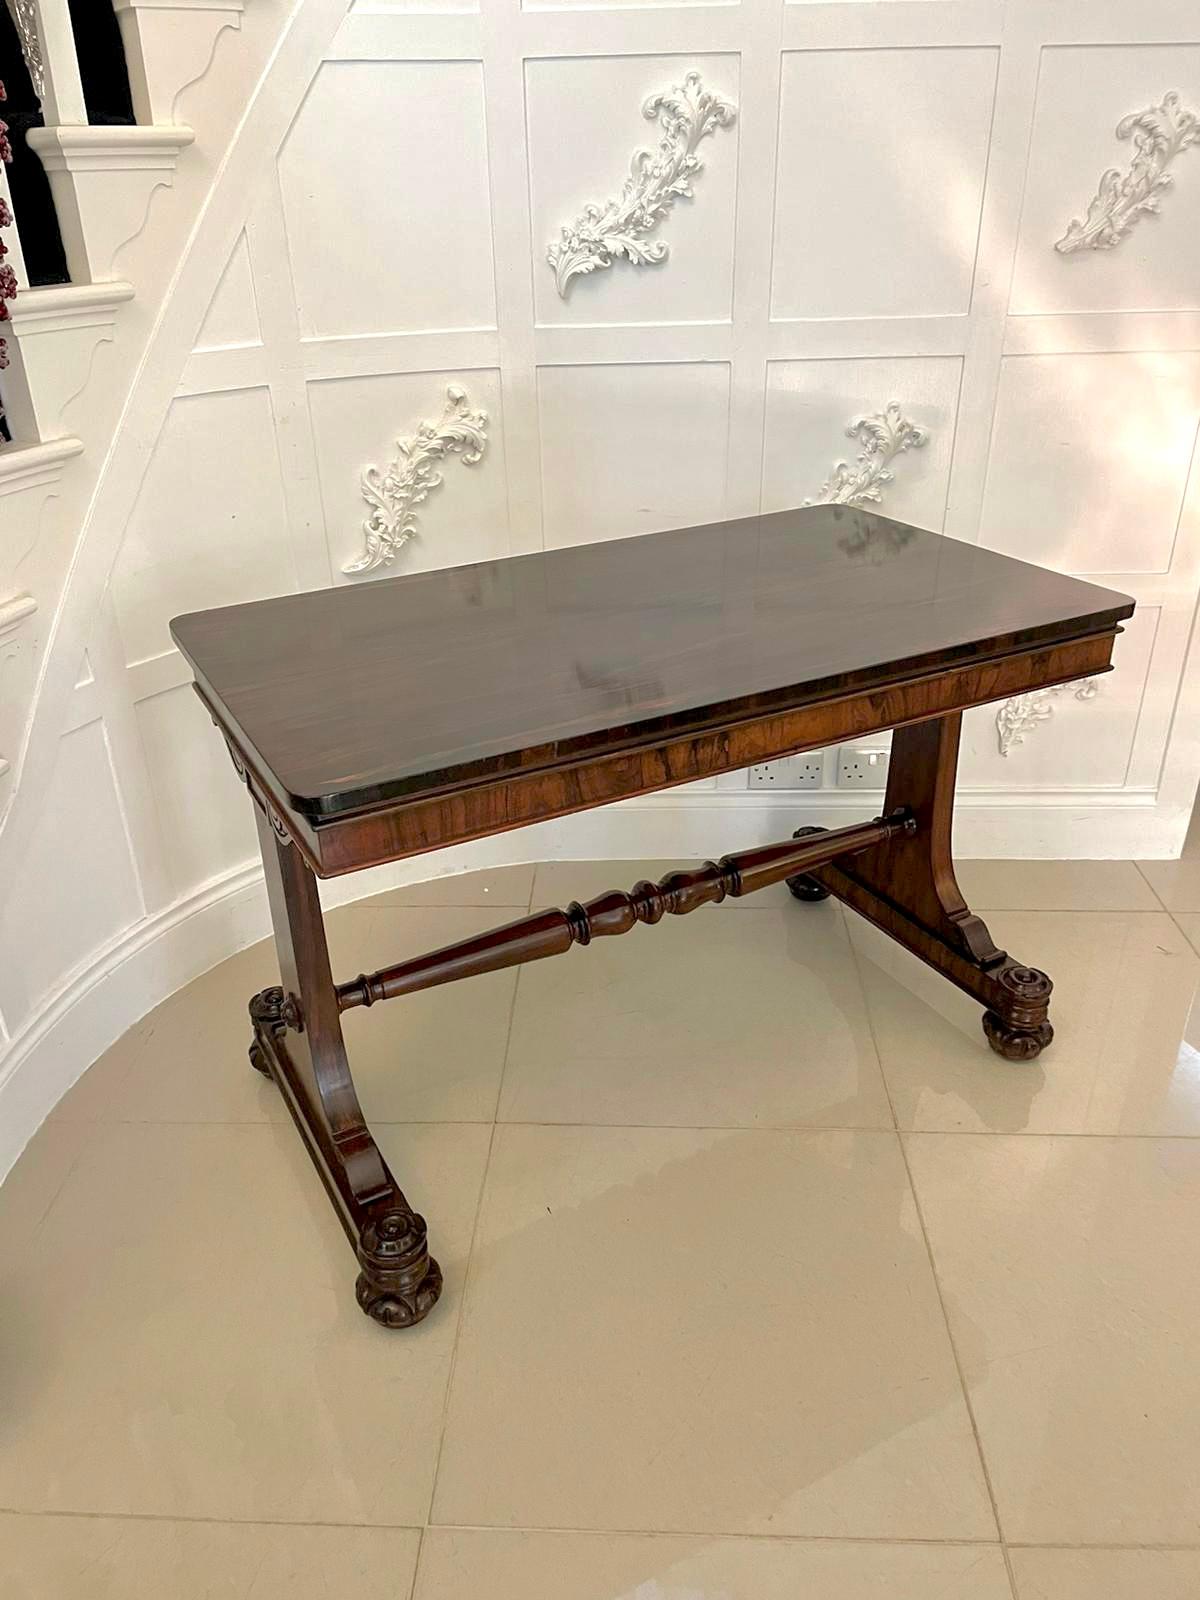 Superb quality antique William IV rosewood centre table having a superb quality rosewood top above a rosewood frieze supported by shaped carved supports standing on a platform base. It is raised by superb carved turned feet united by a turned